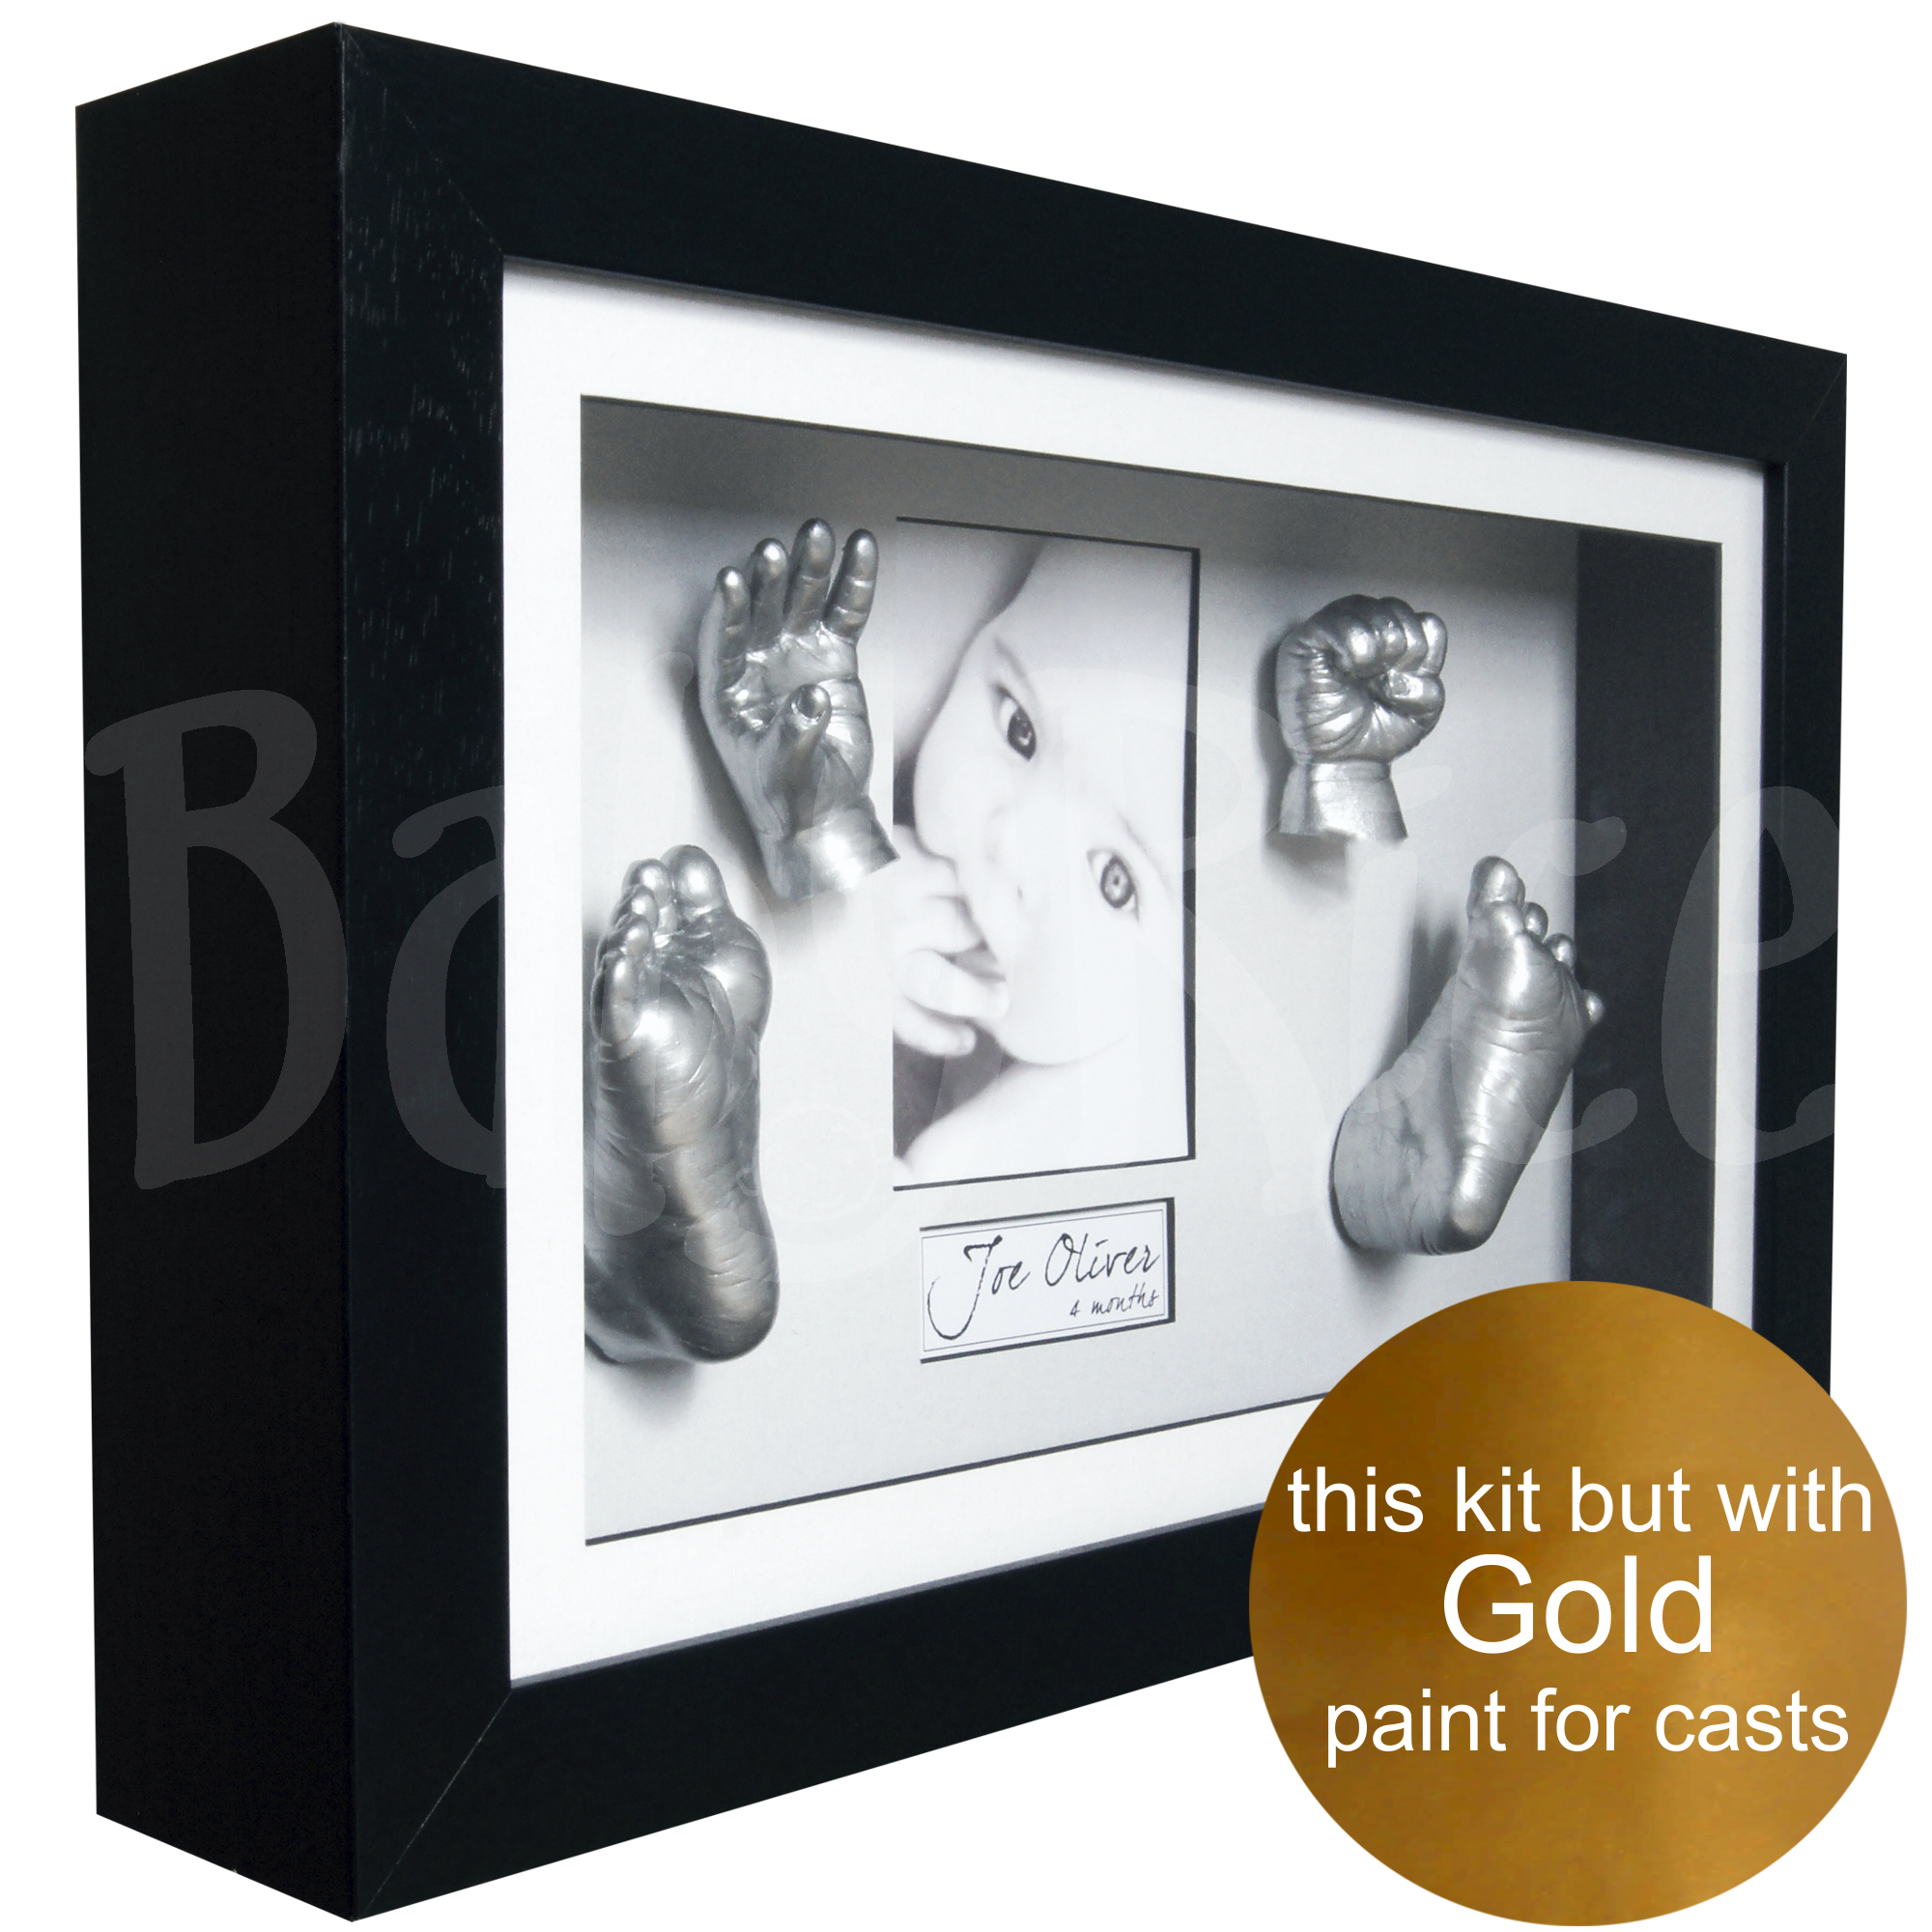 New baby keepsake gift 3D hands and feet casting kit with black frame, gold paint